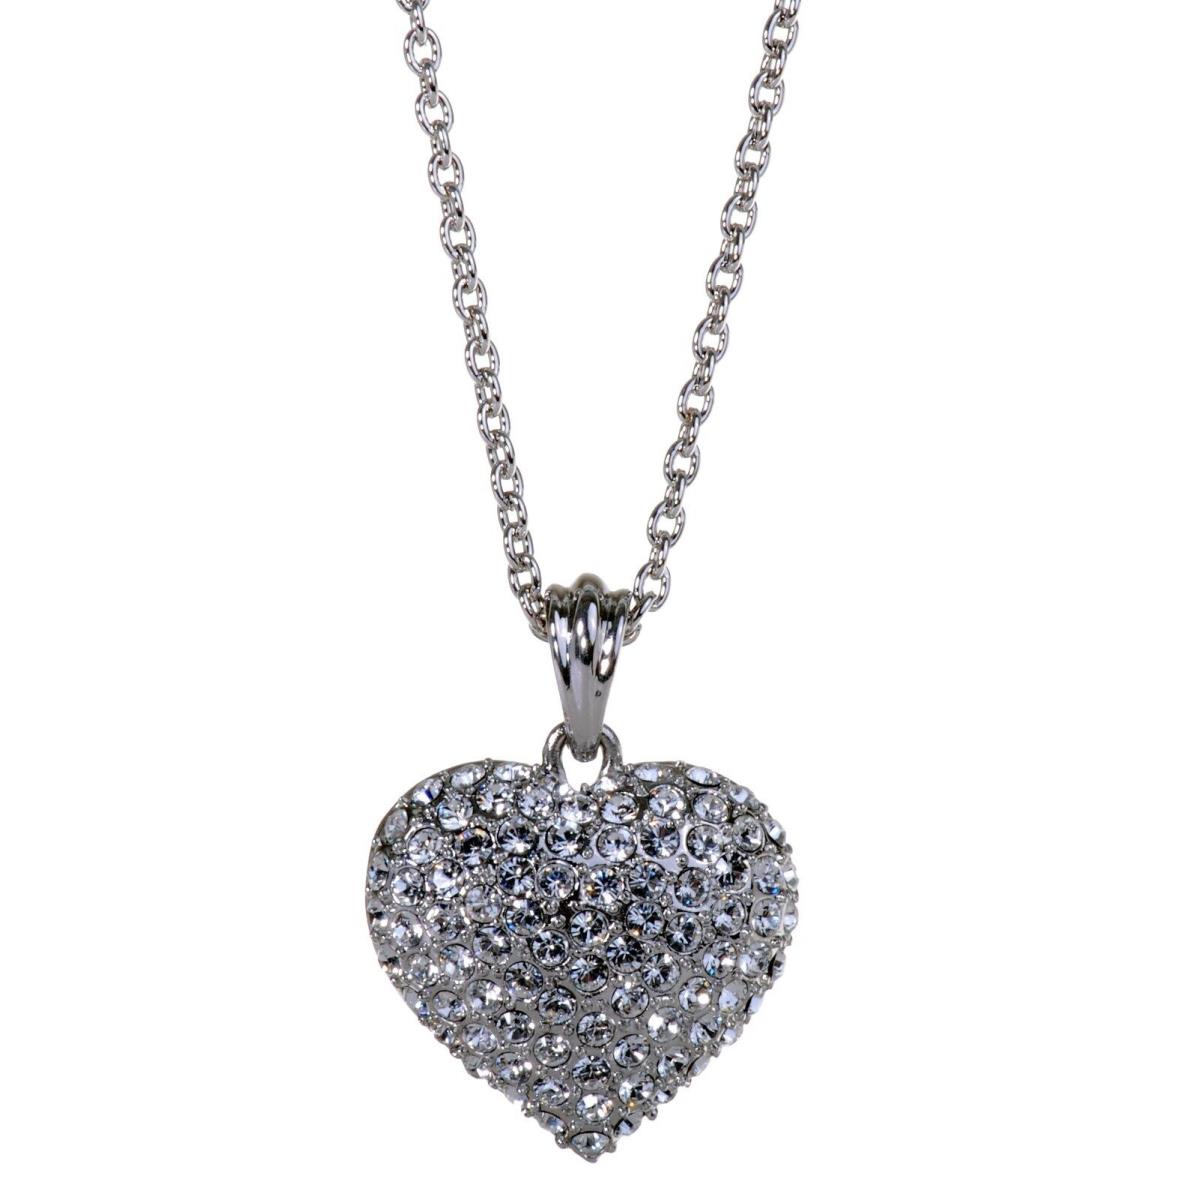 Crystals From Swarovski Puffed Heart Pendant Necklace Rhodium 7116s